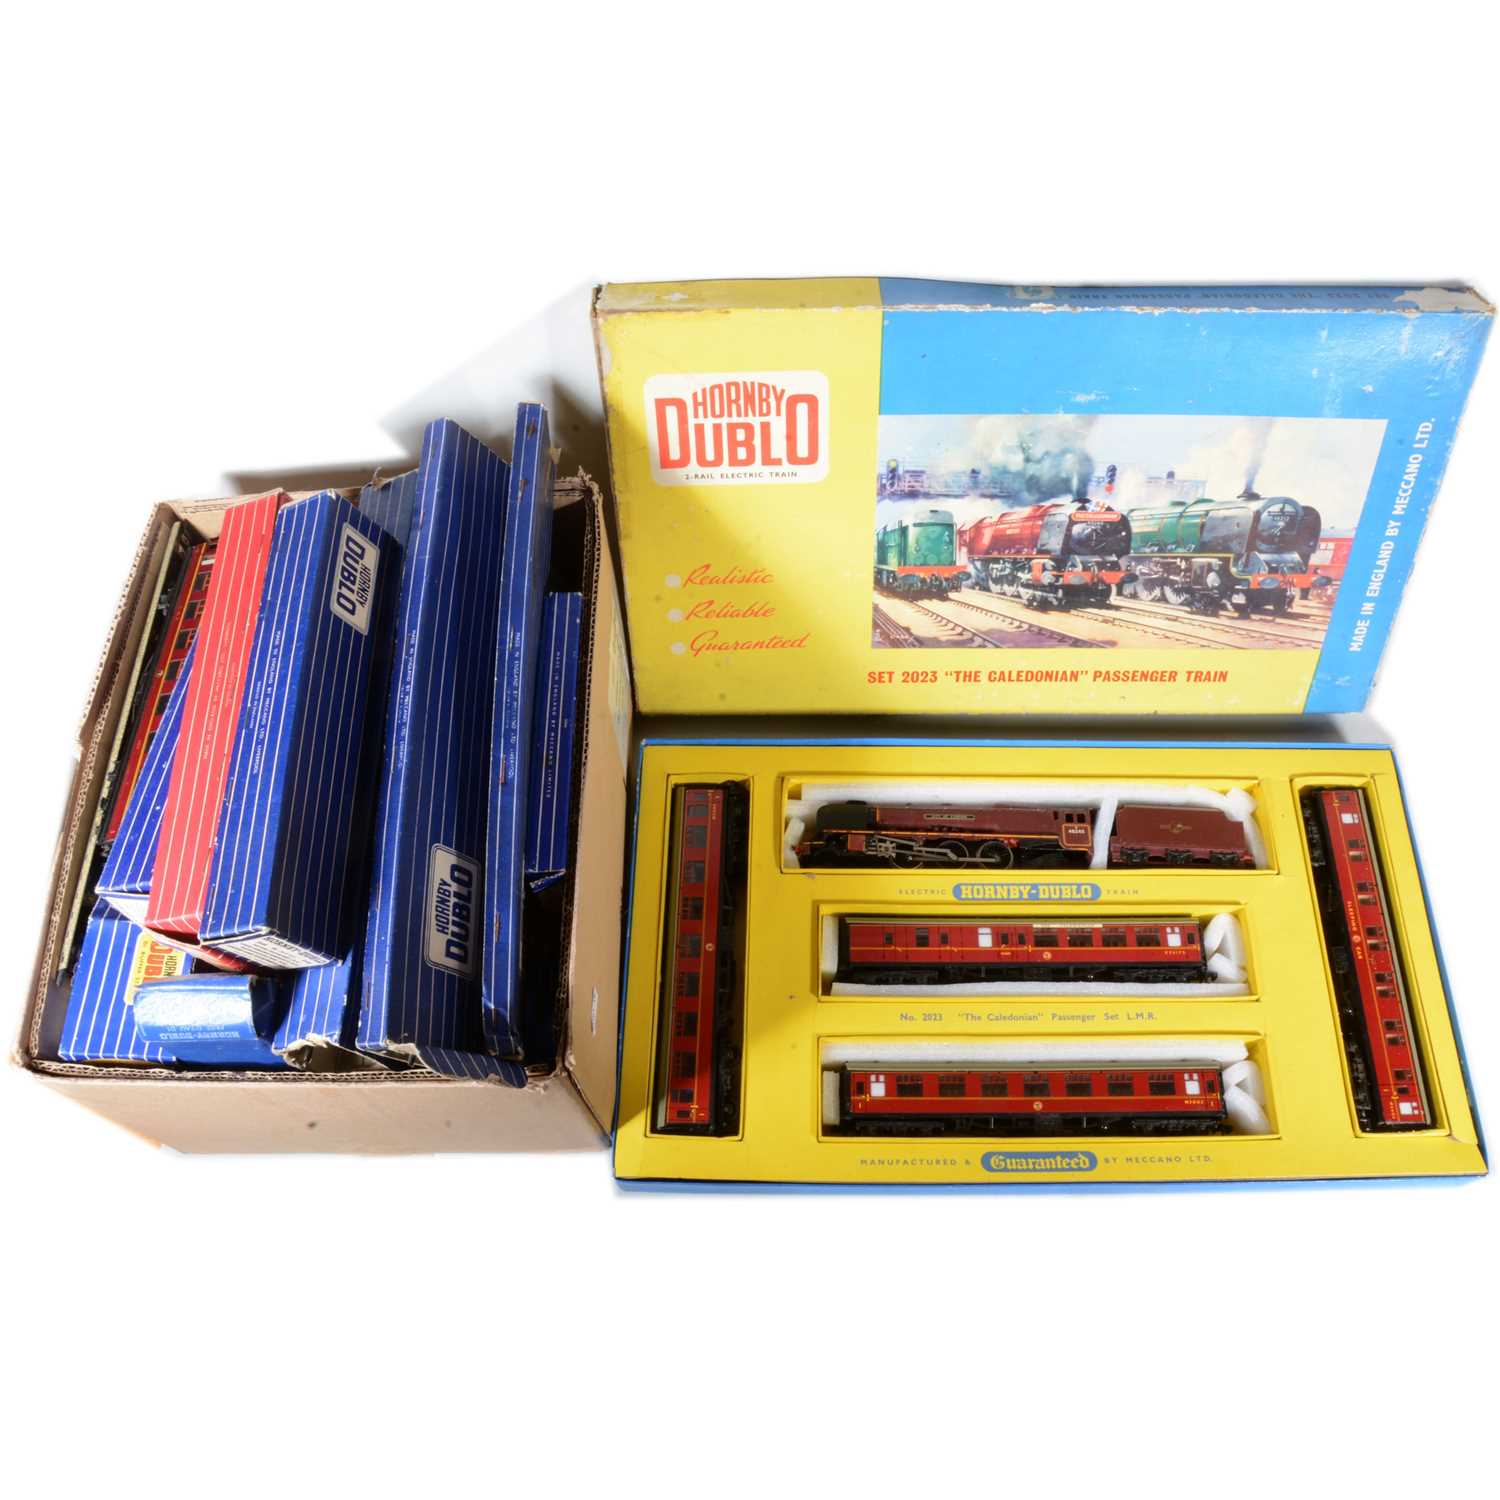 Lot 51 - Hornby Dublo OO gauge model railway set 2023, coaches and track.